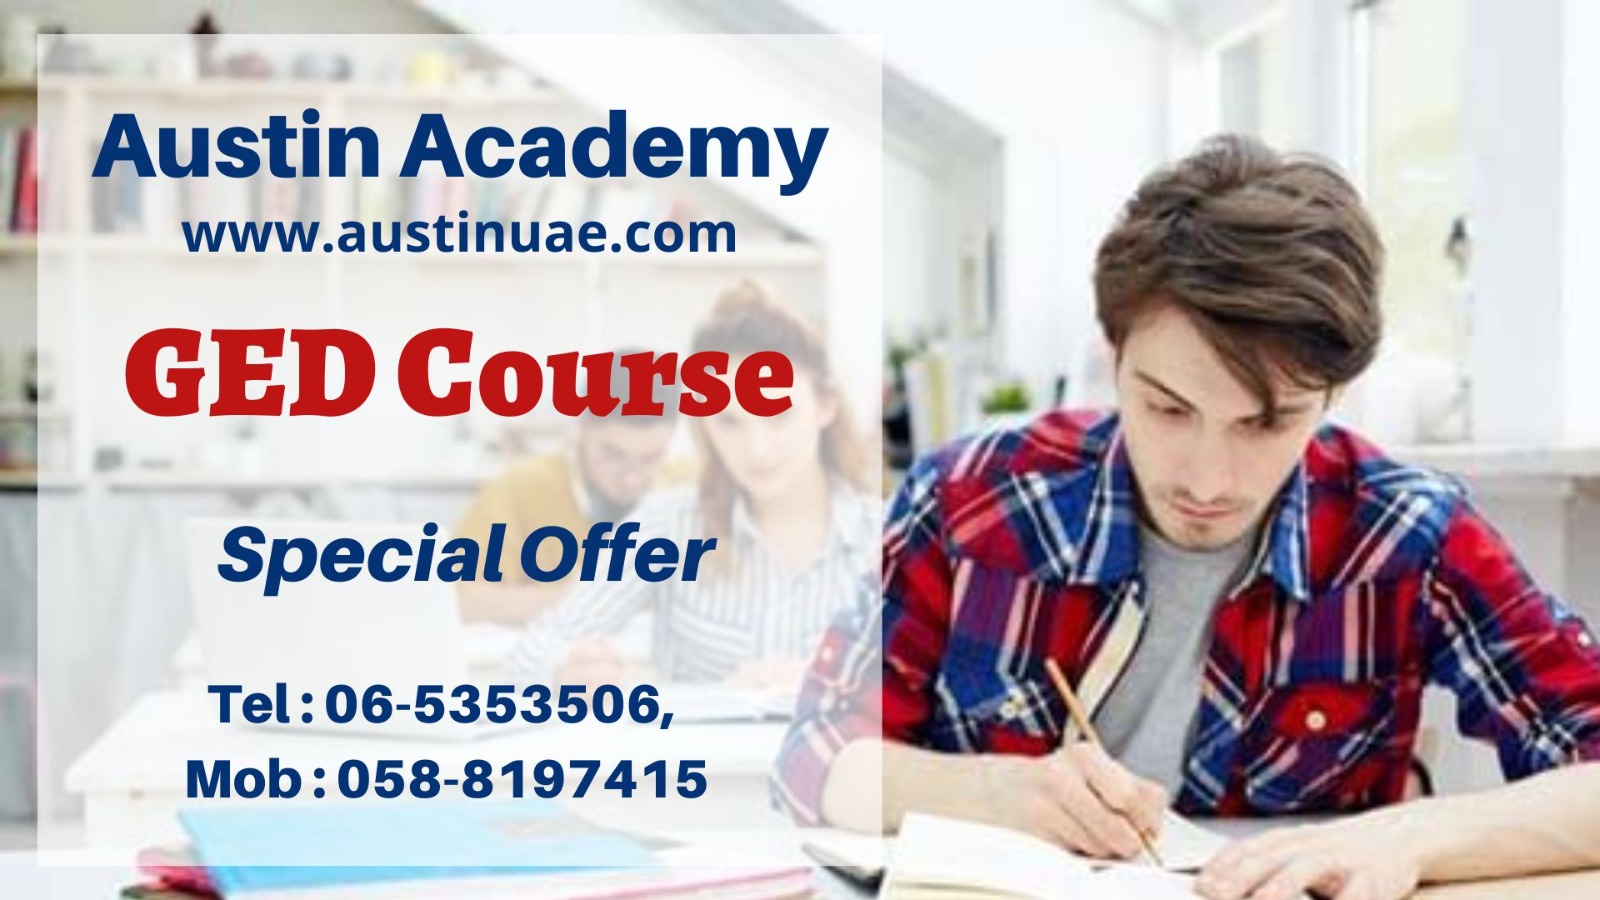 GED Classes in Sharjah with an amazing Offer 0564545906